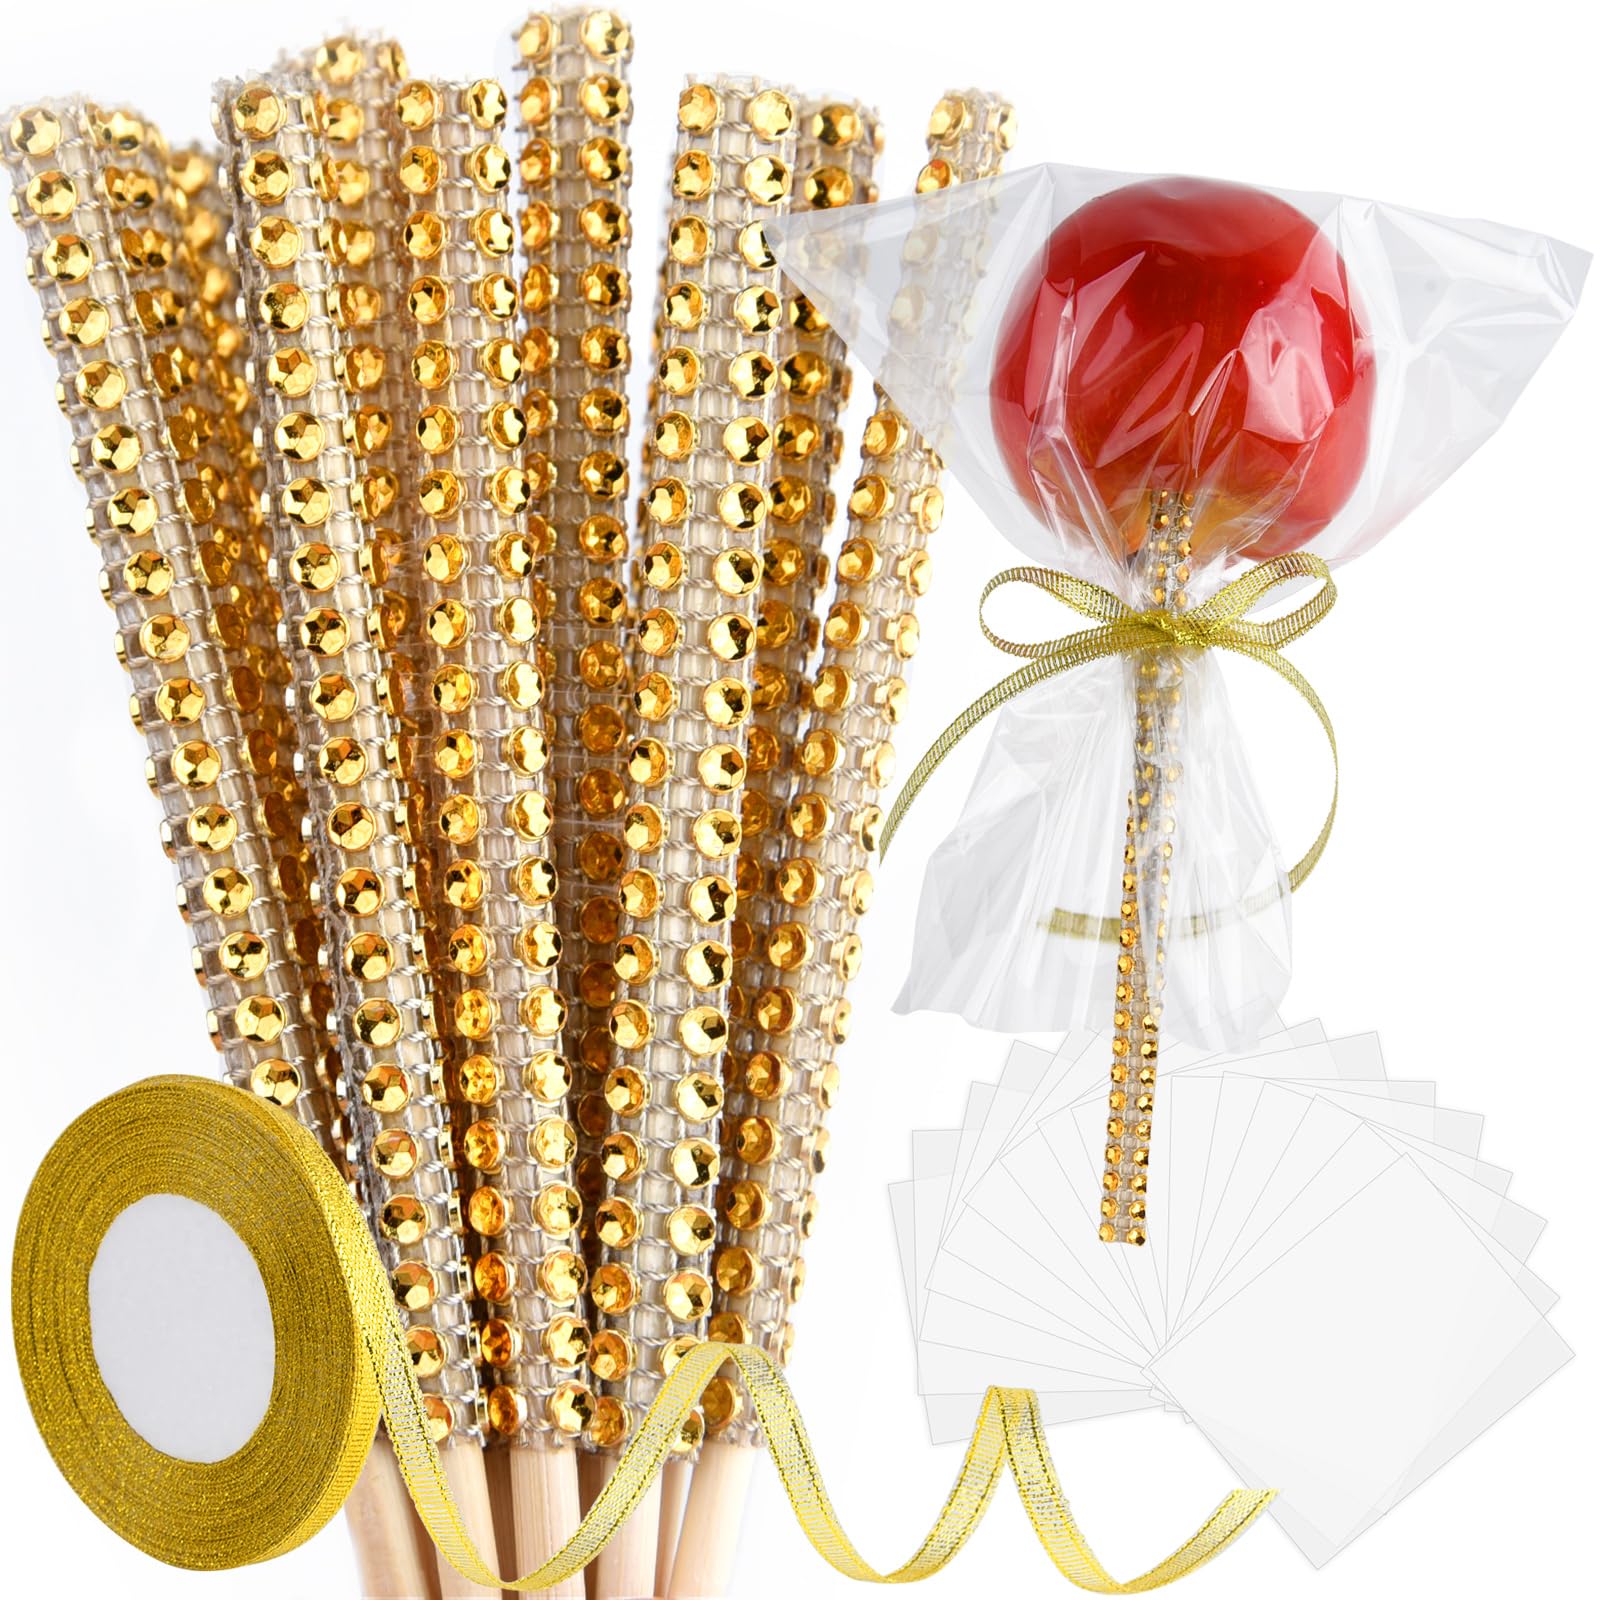 ASTARON 24 Pack Glitter Candy Apple Sticks and Bags, Toffee Apple Kit Including Caramel Apple Stick, Ribbon and Chocolate Apple Bags(Gold)